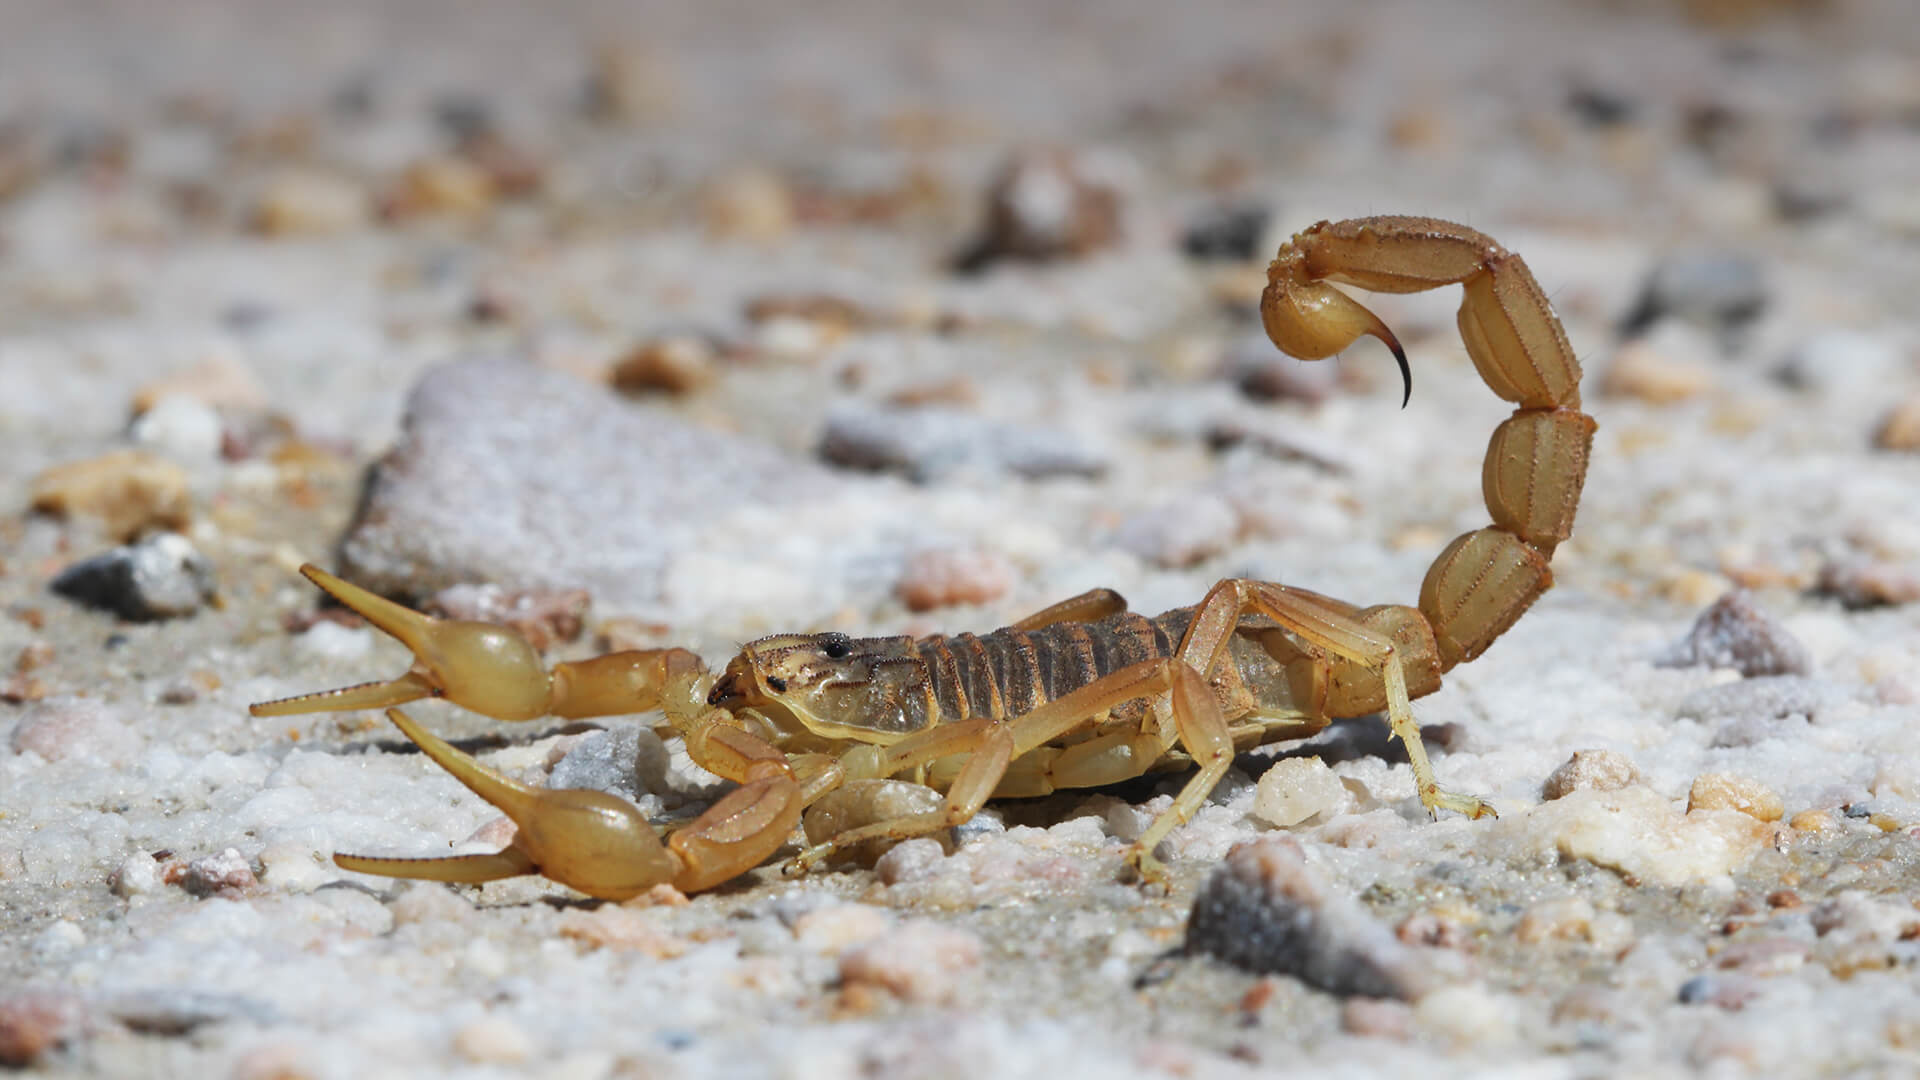 Scorpion (Animal): Uses their pincers to grab prey and then whip their venomous tail stinger over. 1920x1080 Full HD Background.